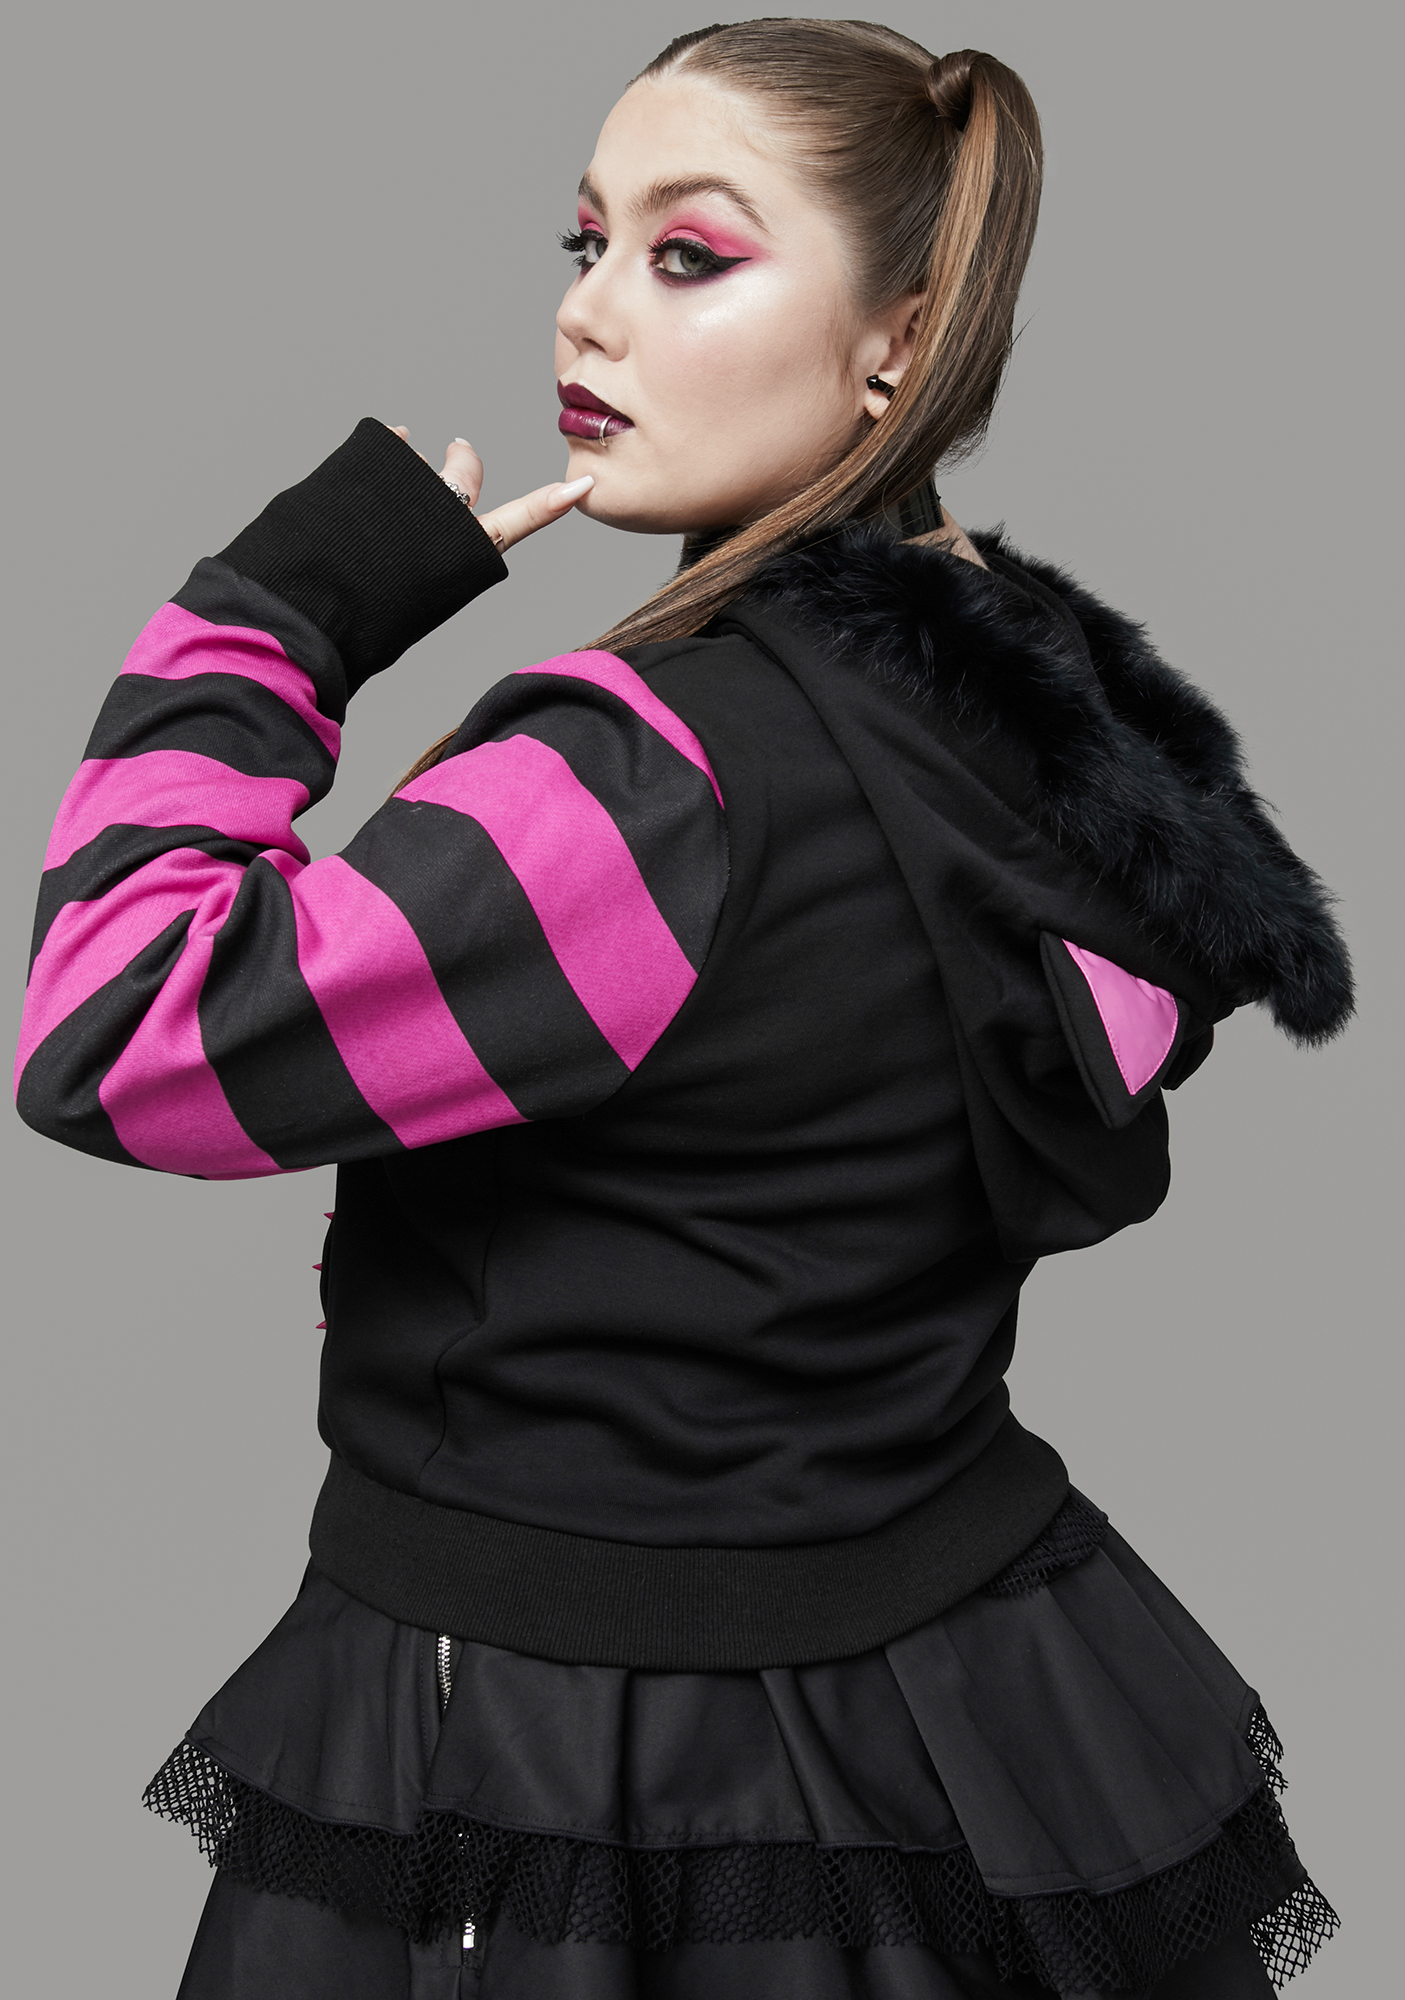 Plus Size Widow Cat Ear Hoodie With Striped Sleeves - Black/Hot 